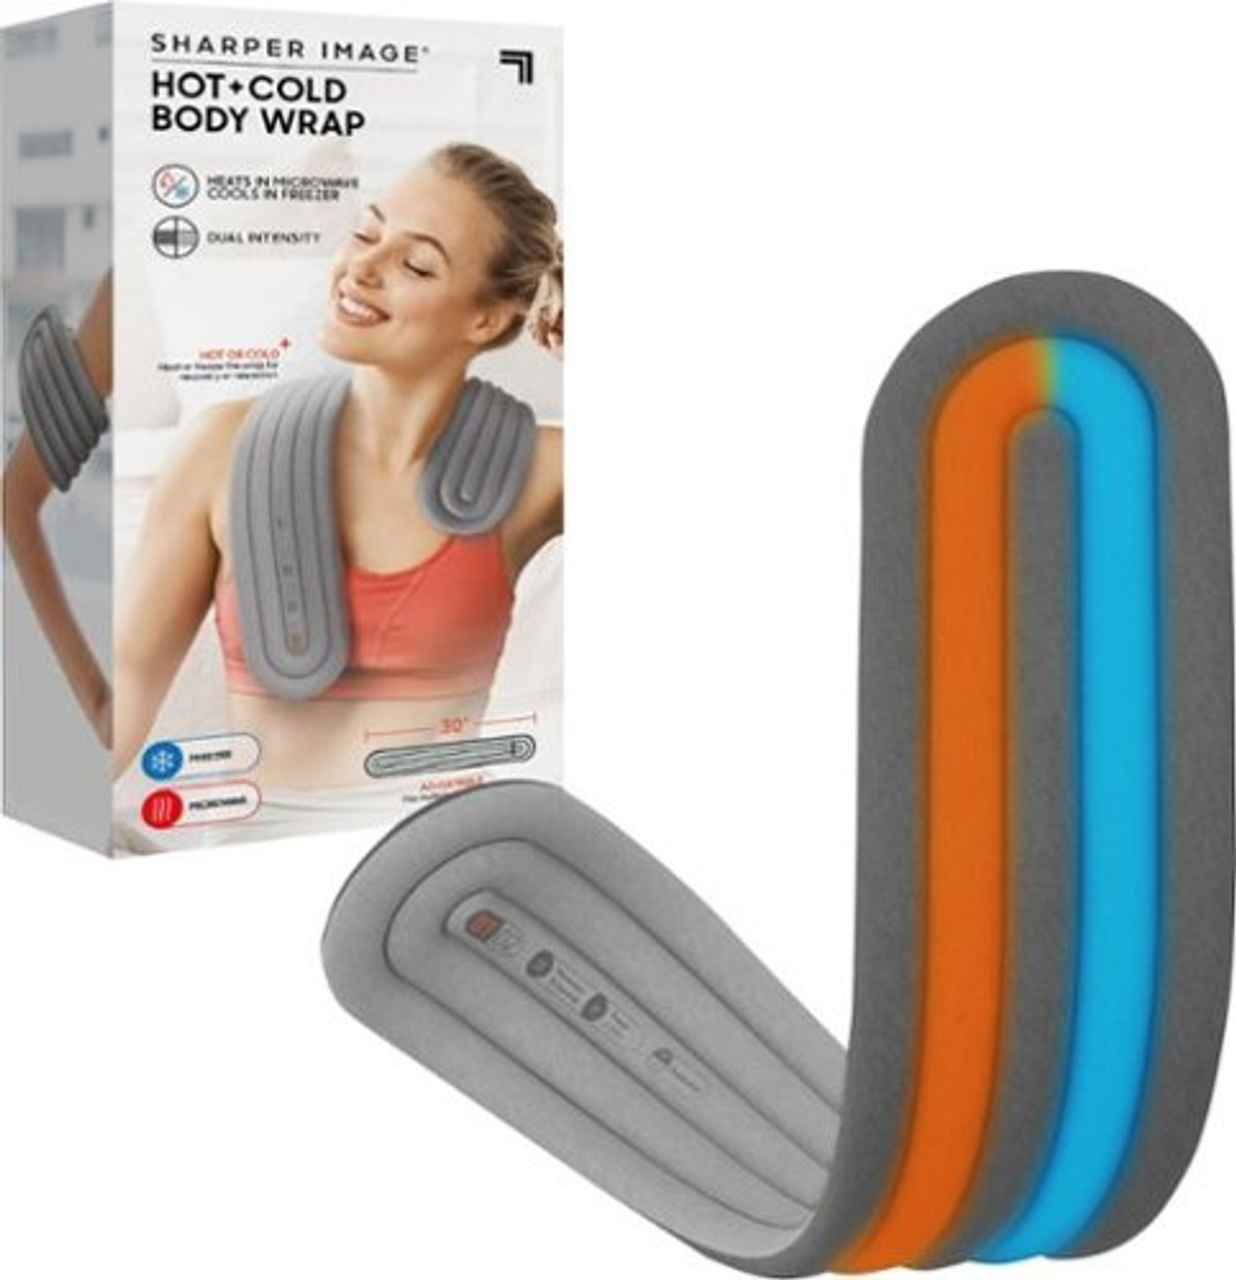 Sharper Image - Hot + Cold Body Wrap, Dual Intensity Soft Fabric for Neck, Shoulders, Legs & Arms - Gray